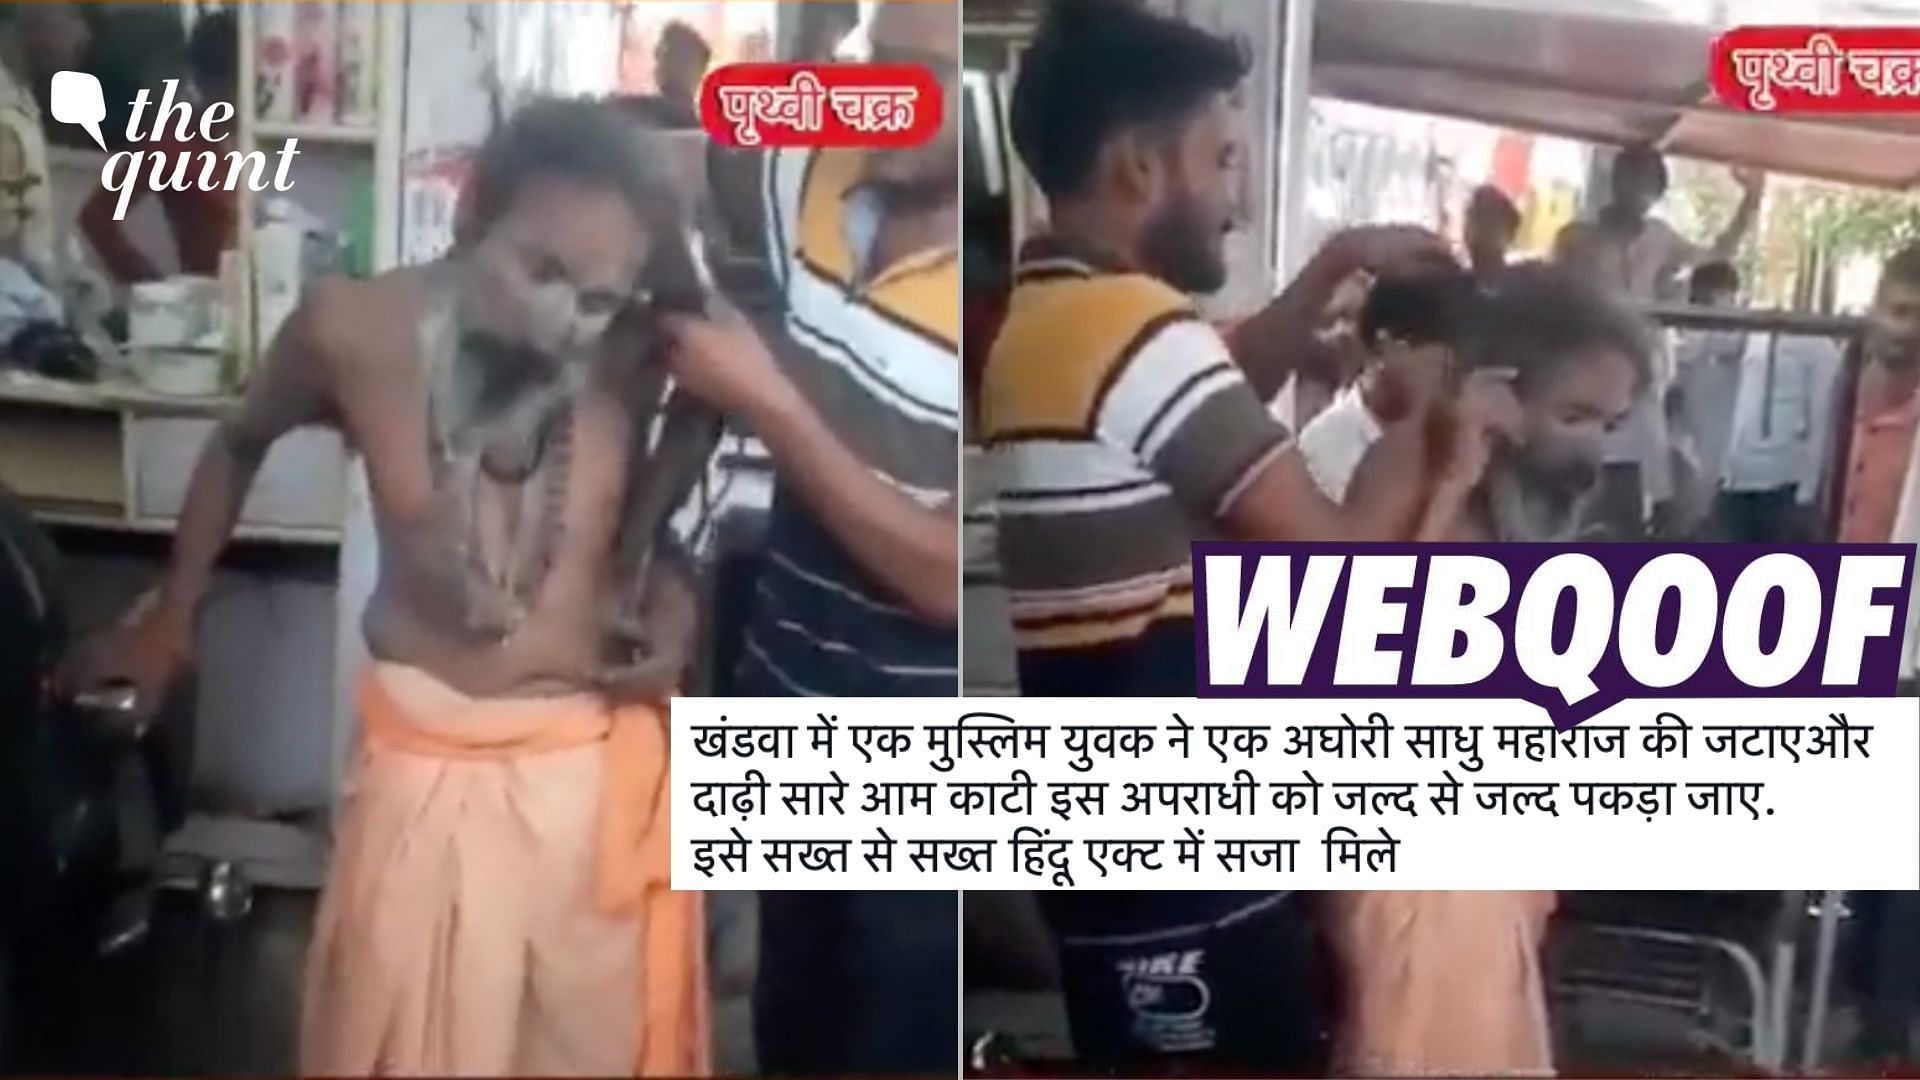 <div class="paragraphs"><p>The video is from Khandwa, Madhya Pradesh, and is being shared with a false communal claim.</p></div>